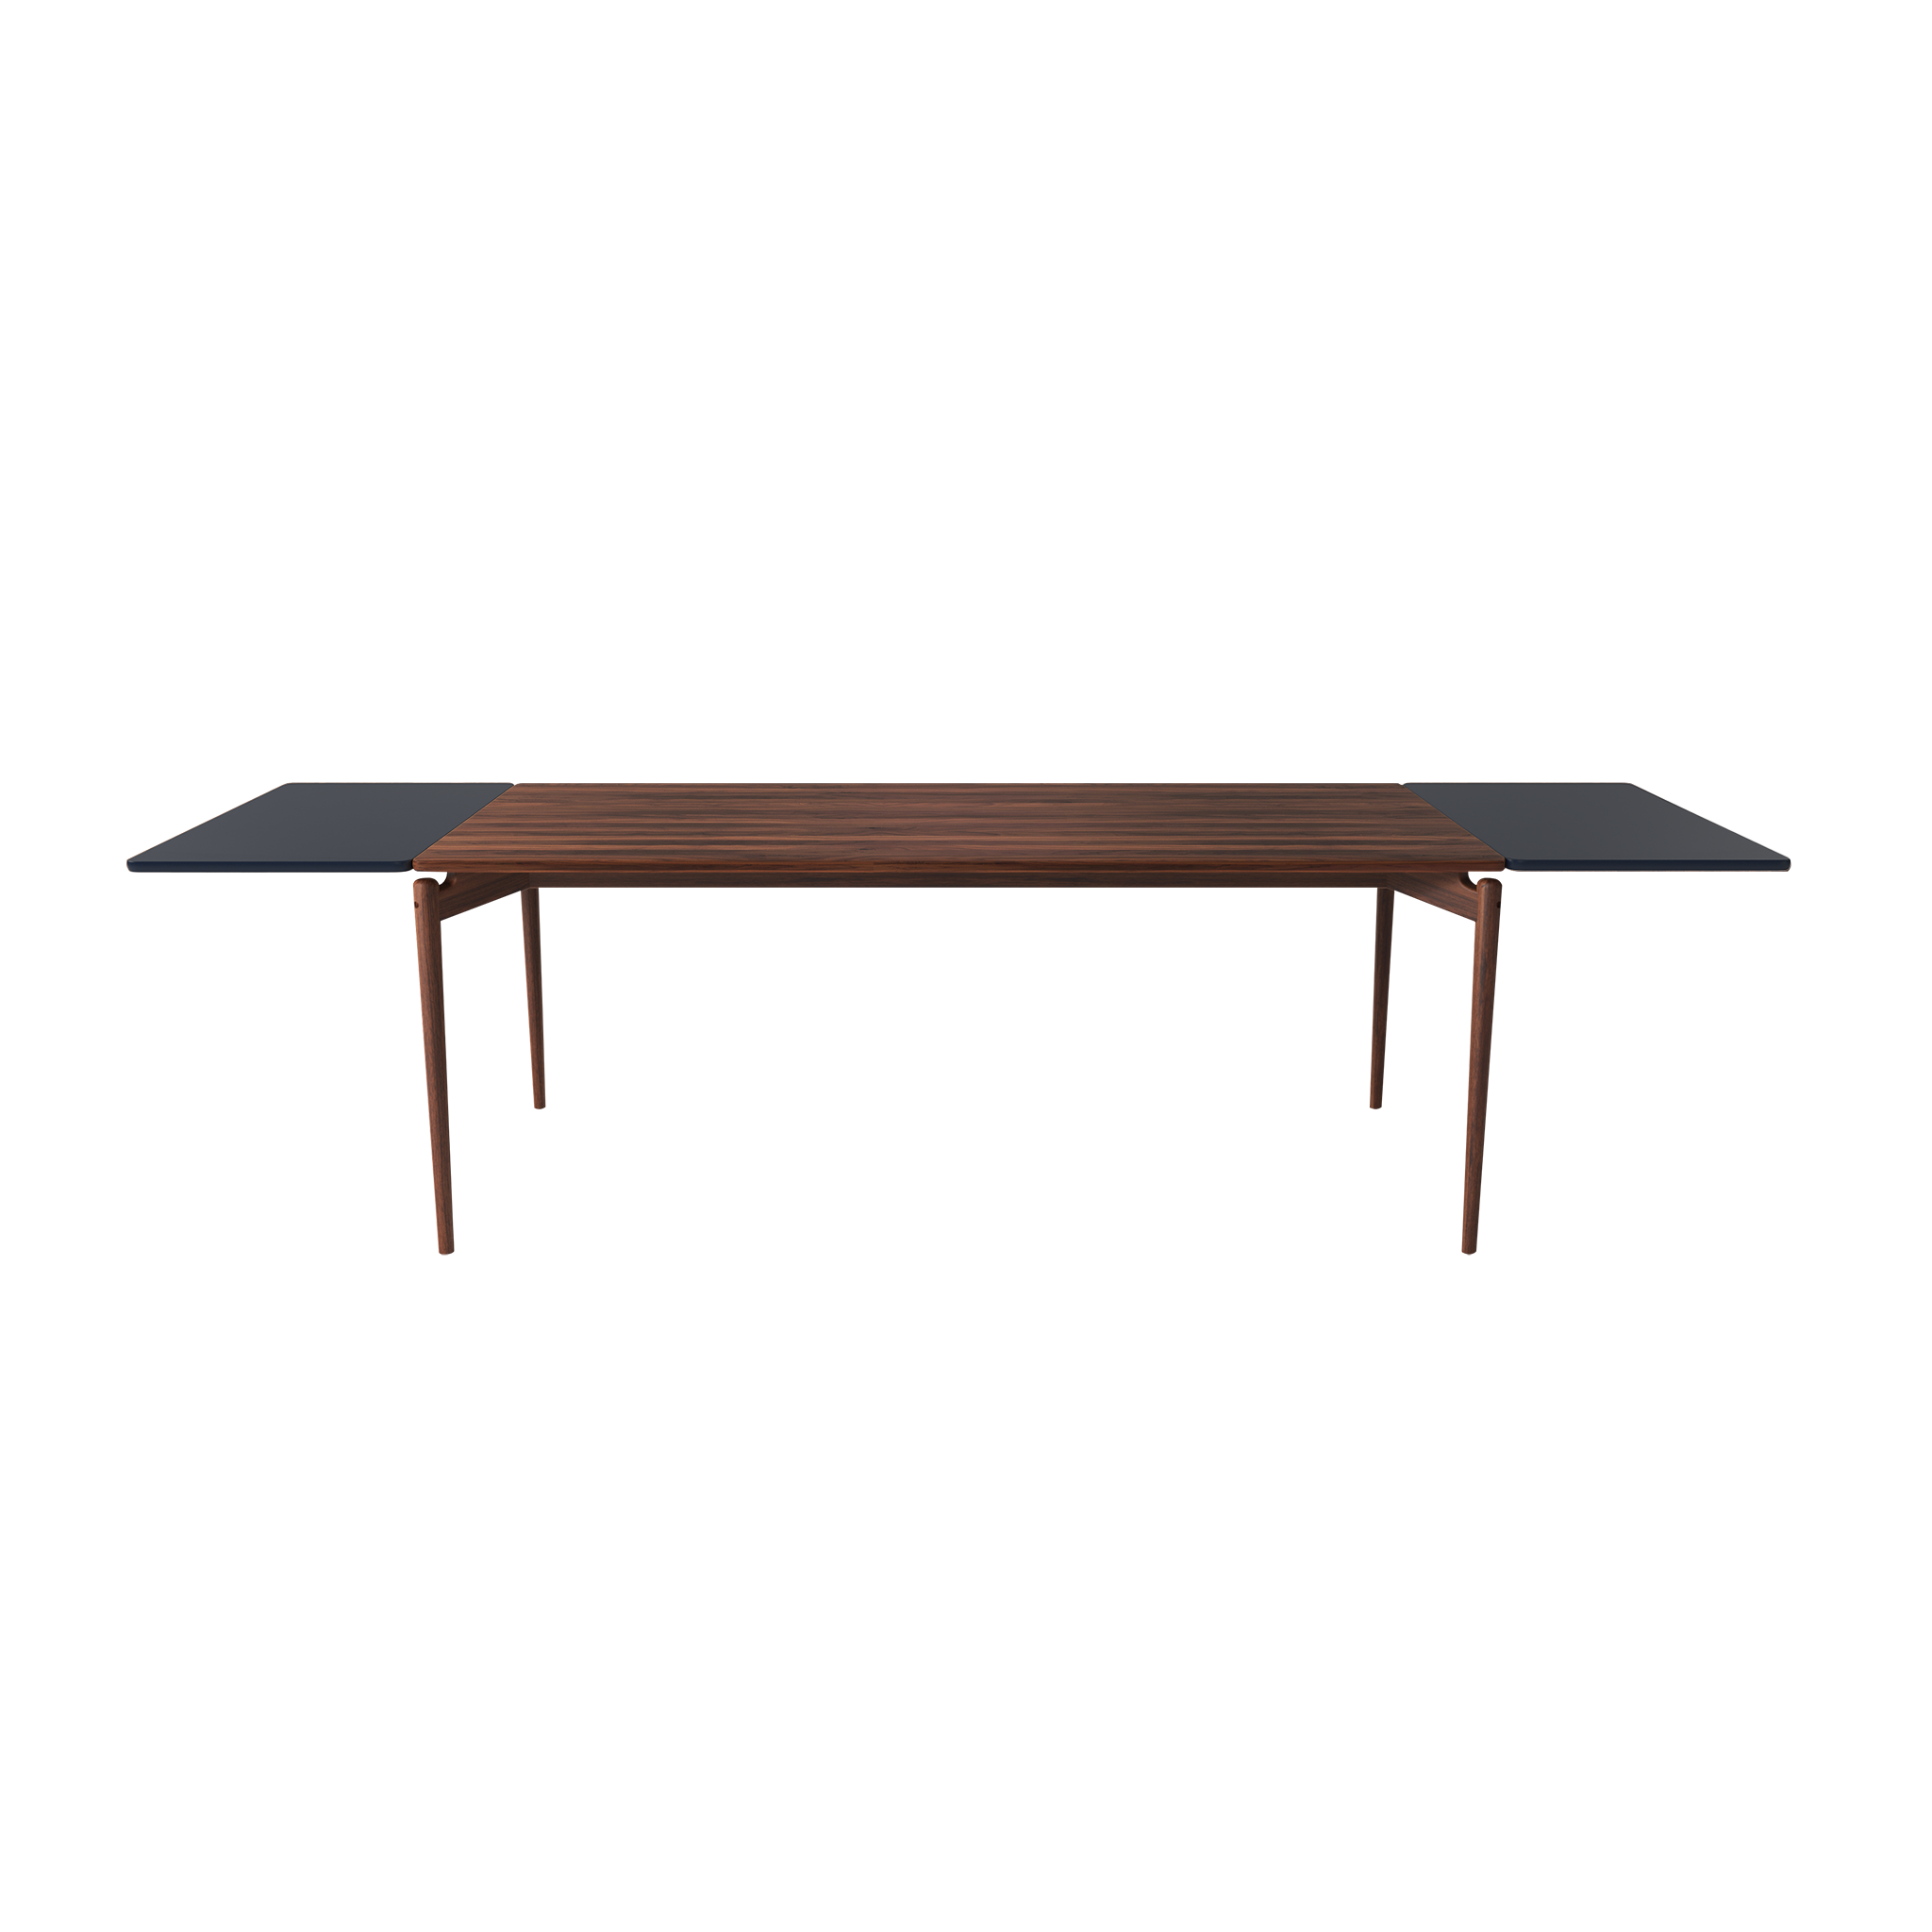 PURE Dining Table Length 190